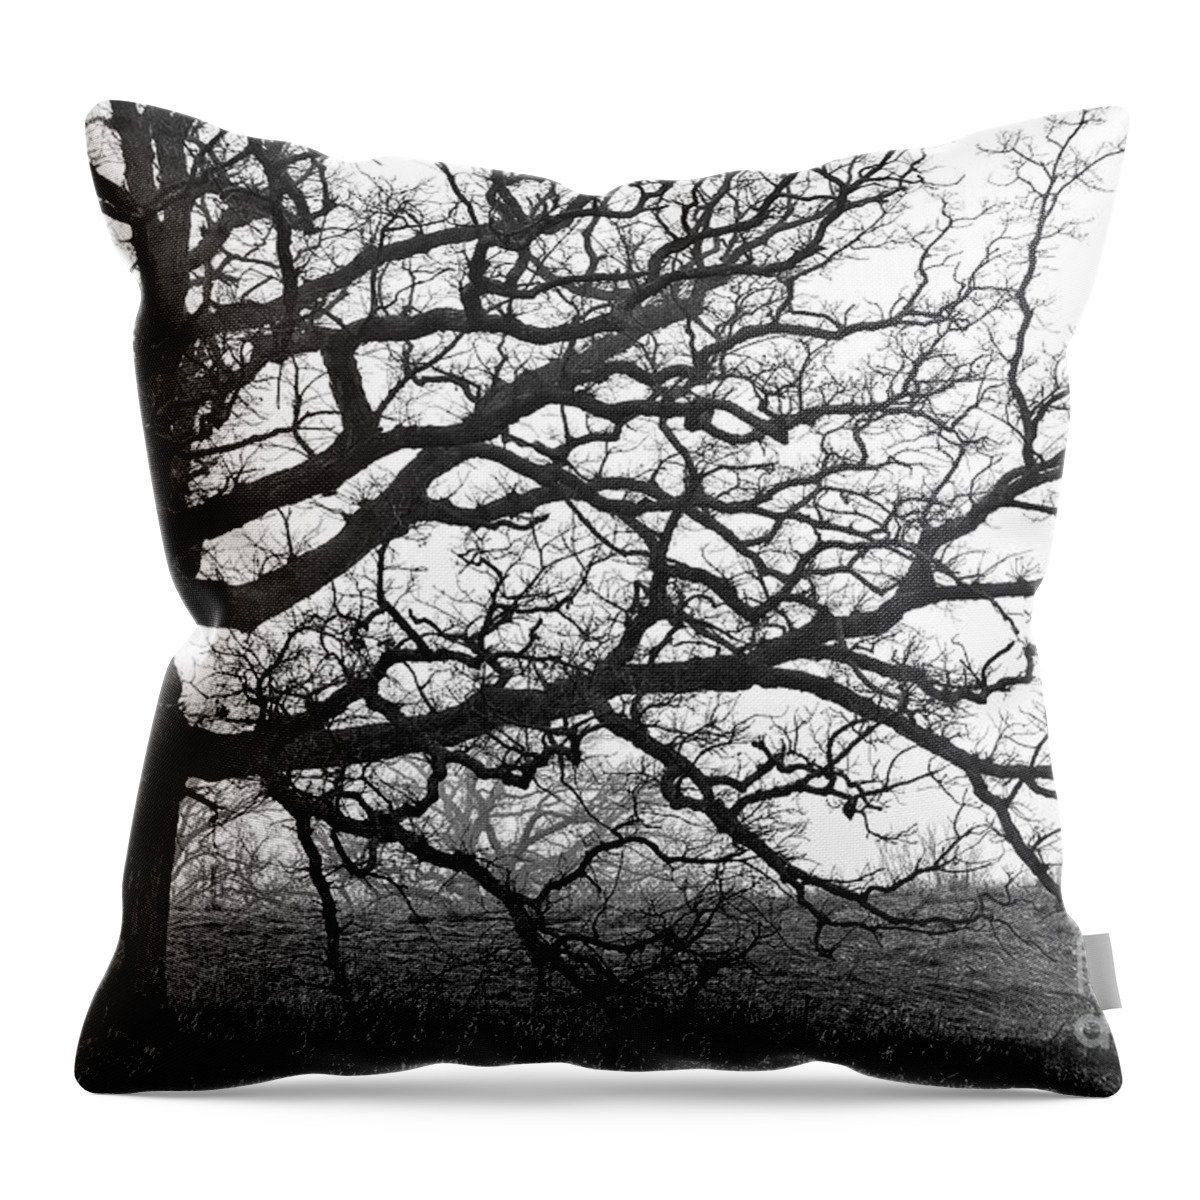 Grayscale Throw Pillow featuring the photograph Herman Munster's Back Yard by Billy Knight